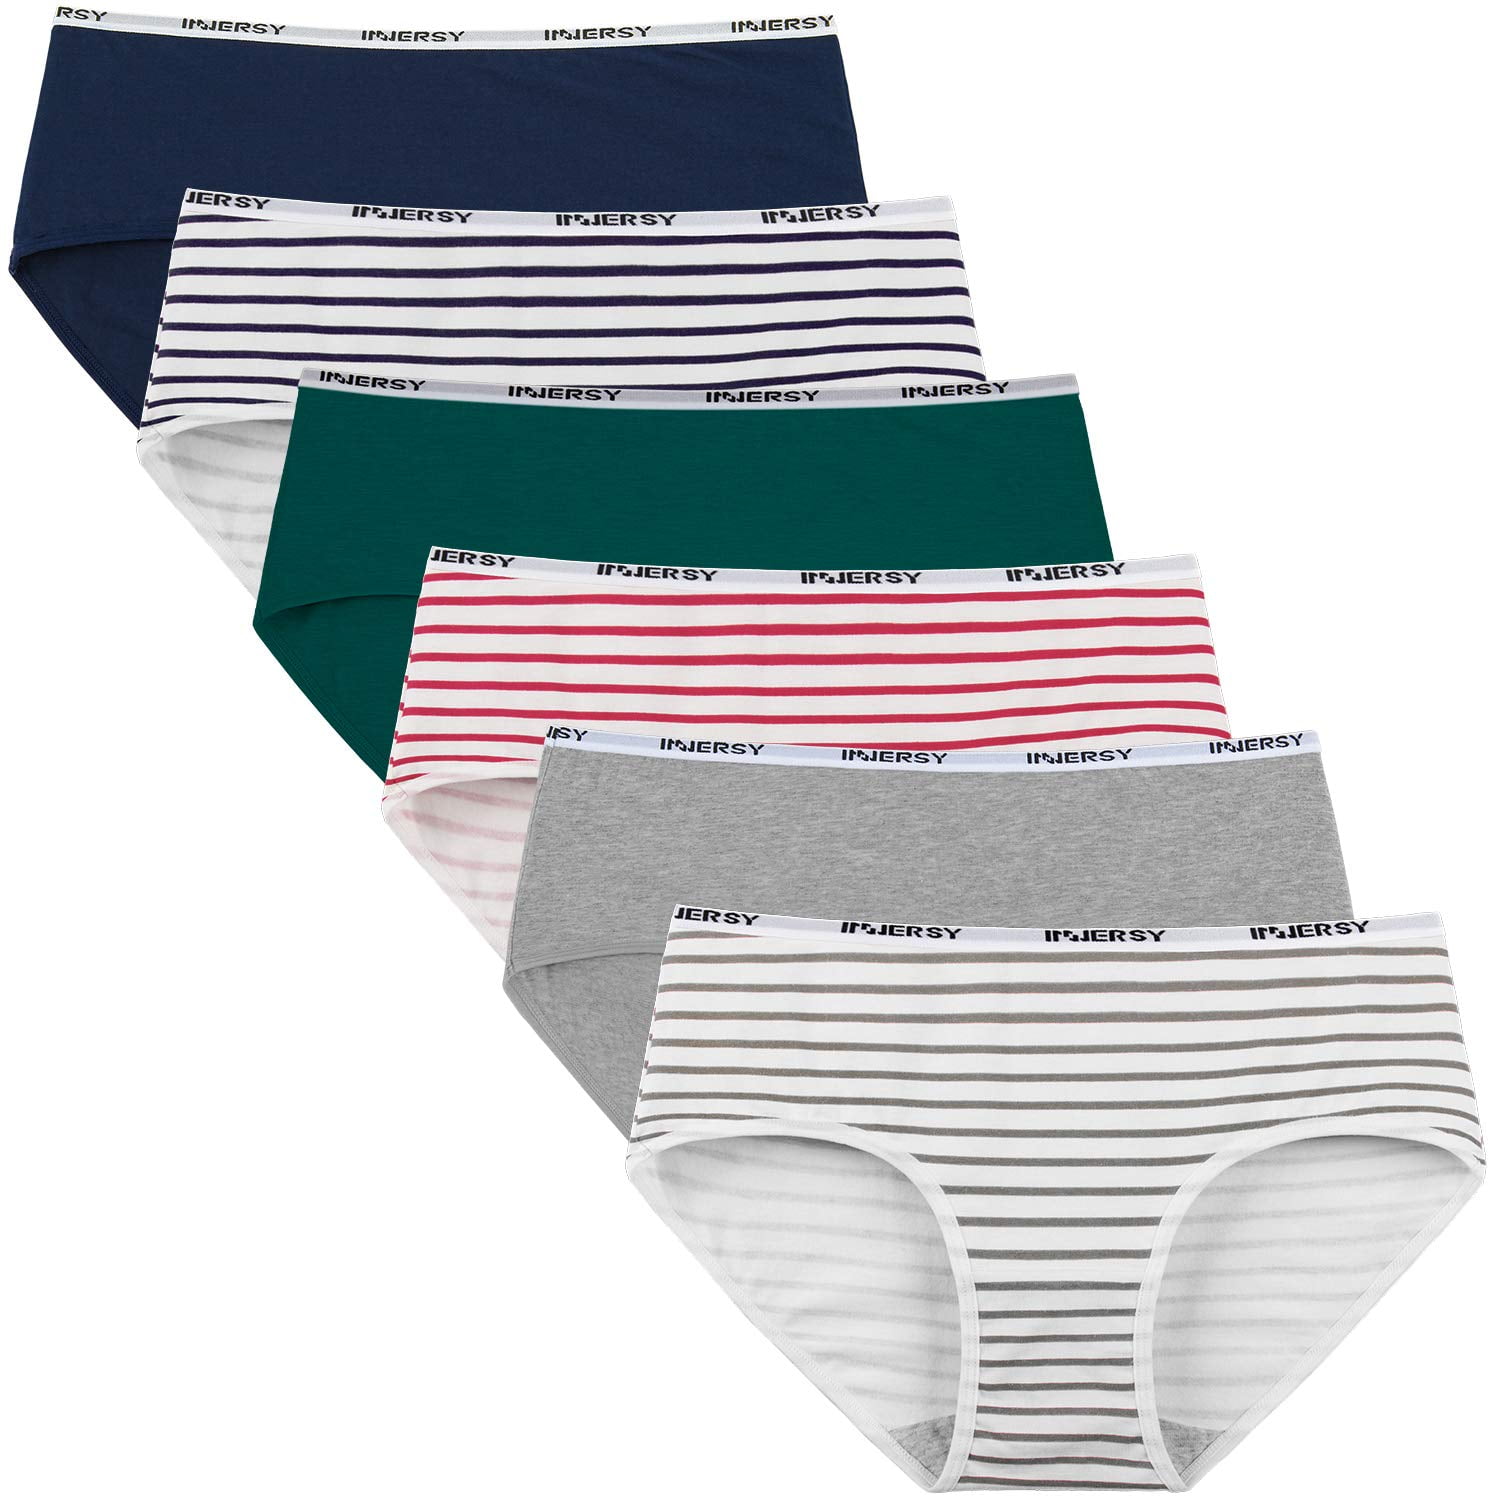 INNERSY Womens Underwear Cotton Hipster Panties Low Rise Basics Underwear  6-Pack (Small, Sport Stripes) 